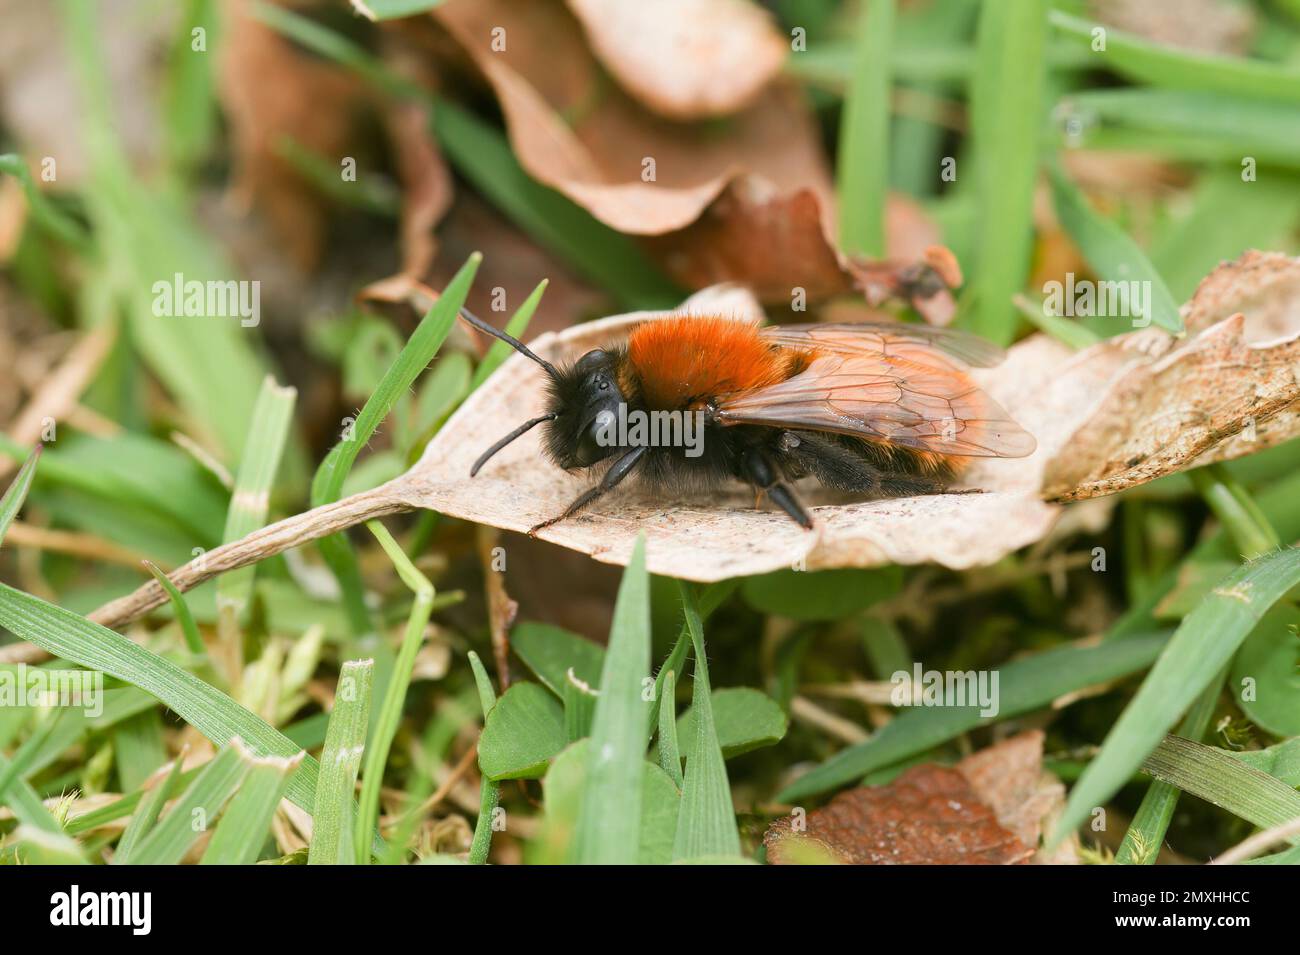 This stock photo features a homeless man with orange wings resting on a leaf in the grass Stock Photo